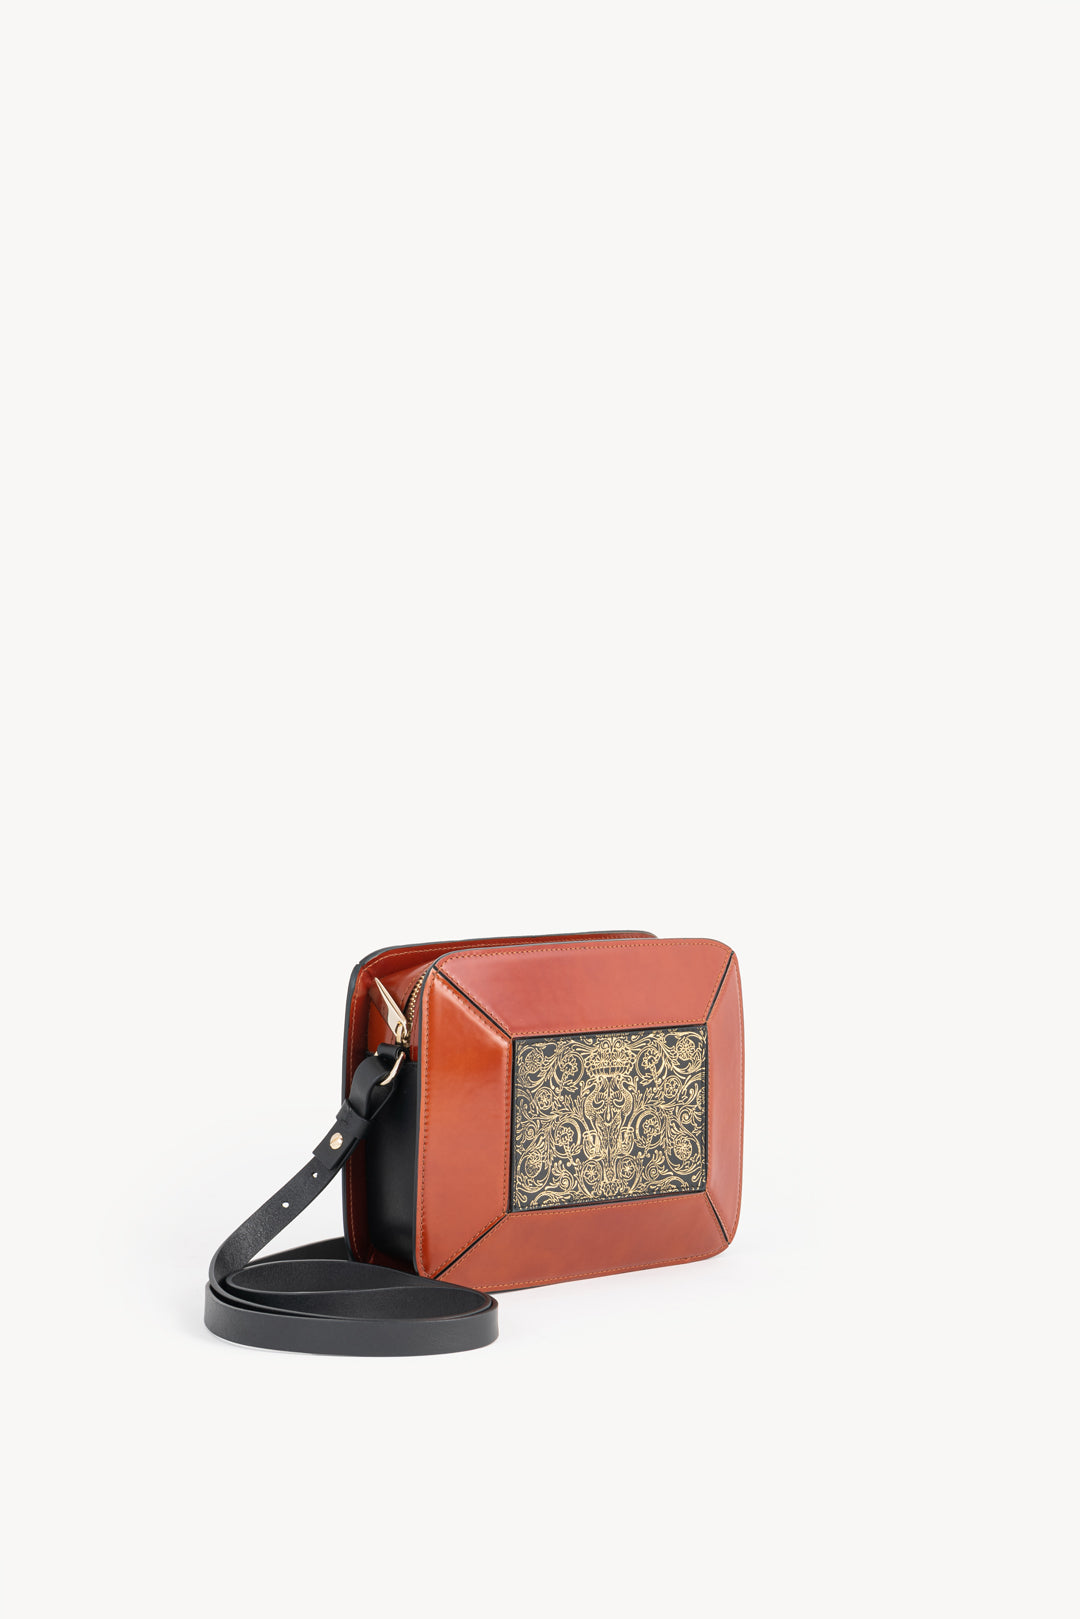 Crossbody - Brown and Black